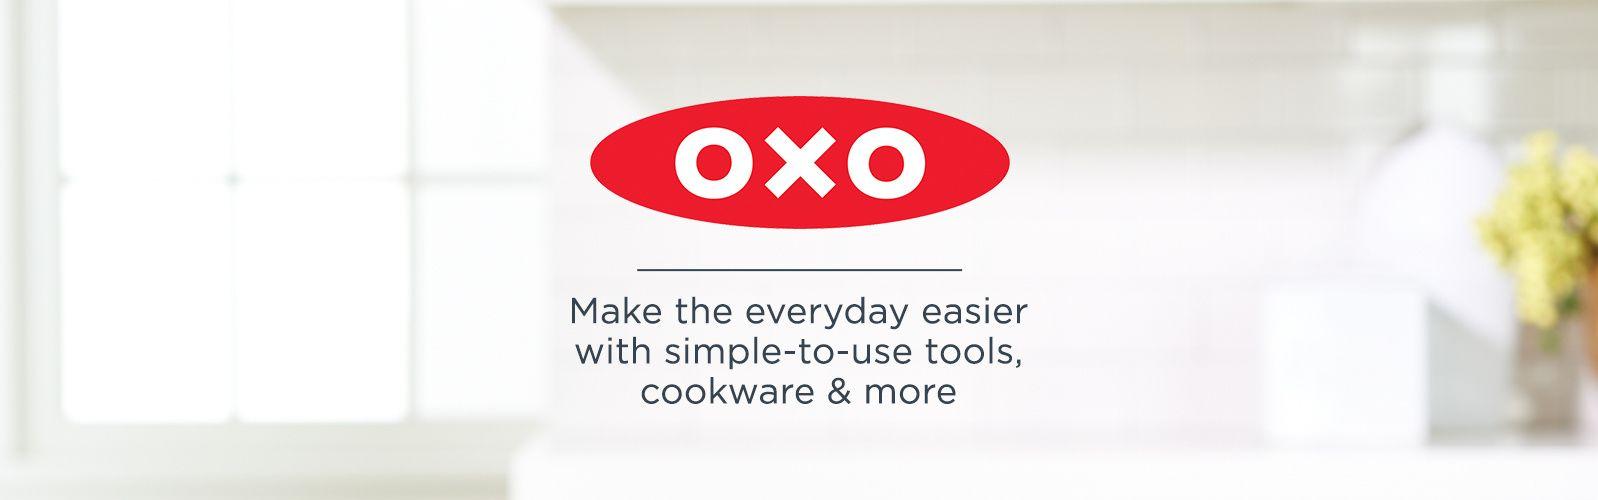 OXO Logo - OXO Tools, Containers, Cookware